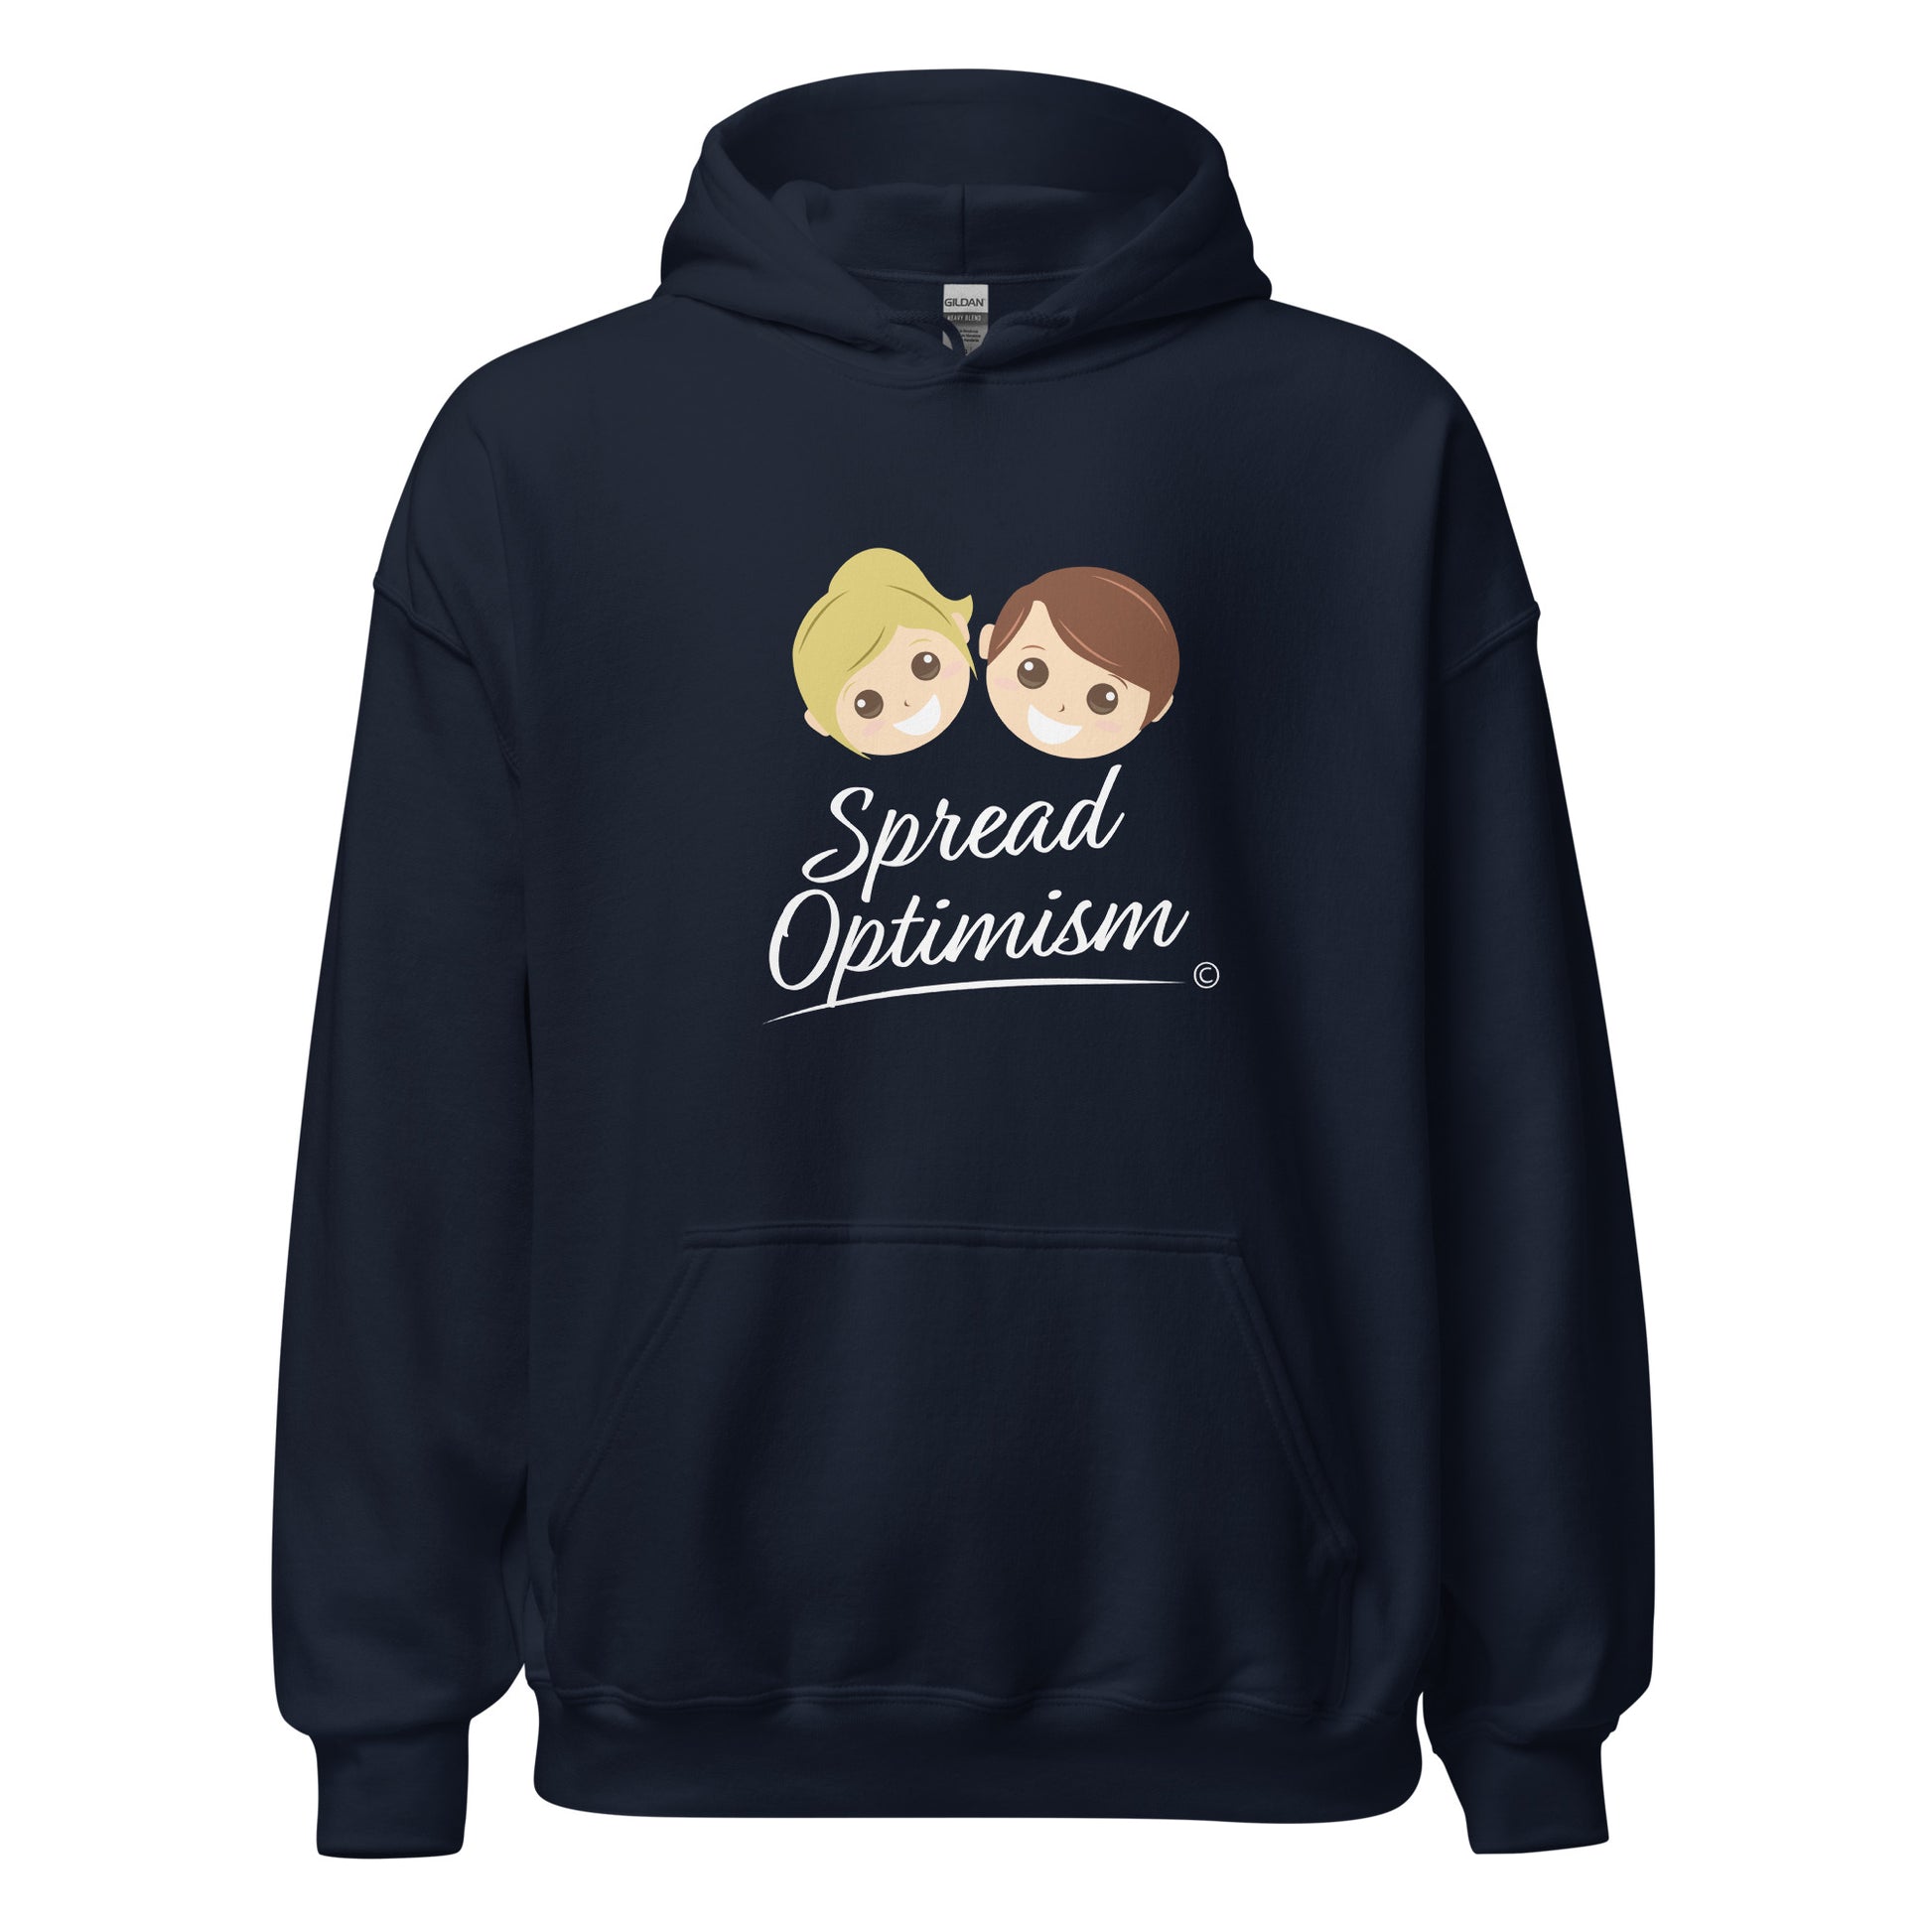 Outdoor unisex hoodies for him and her-Navy